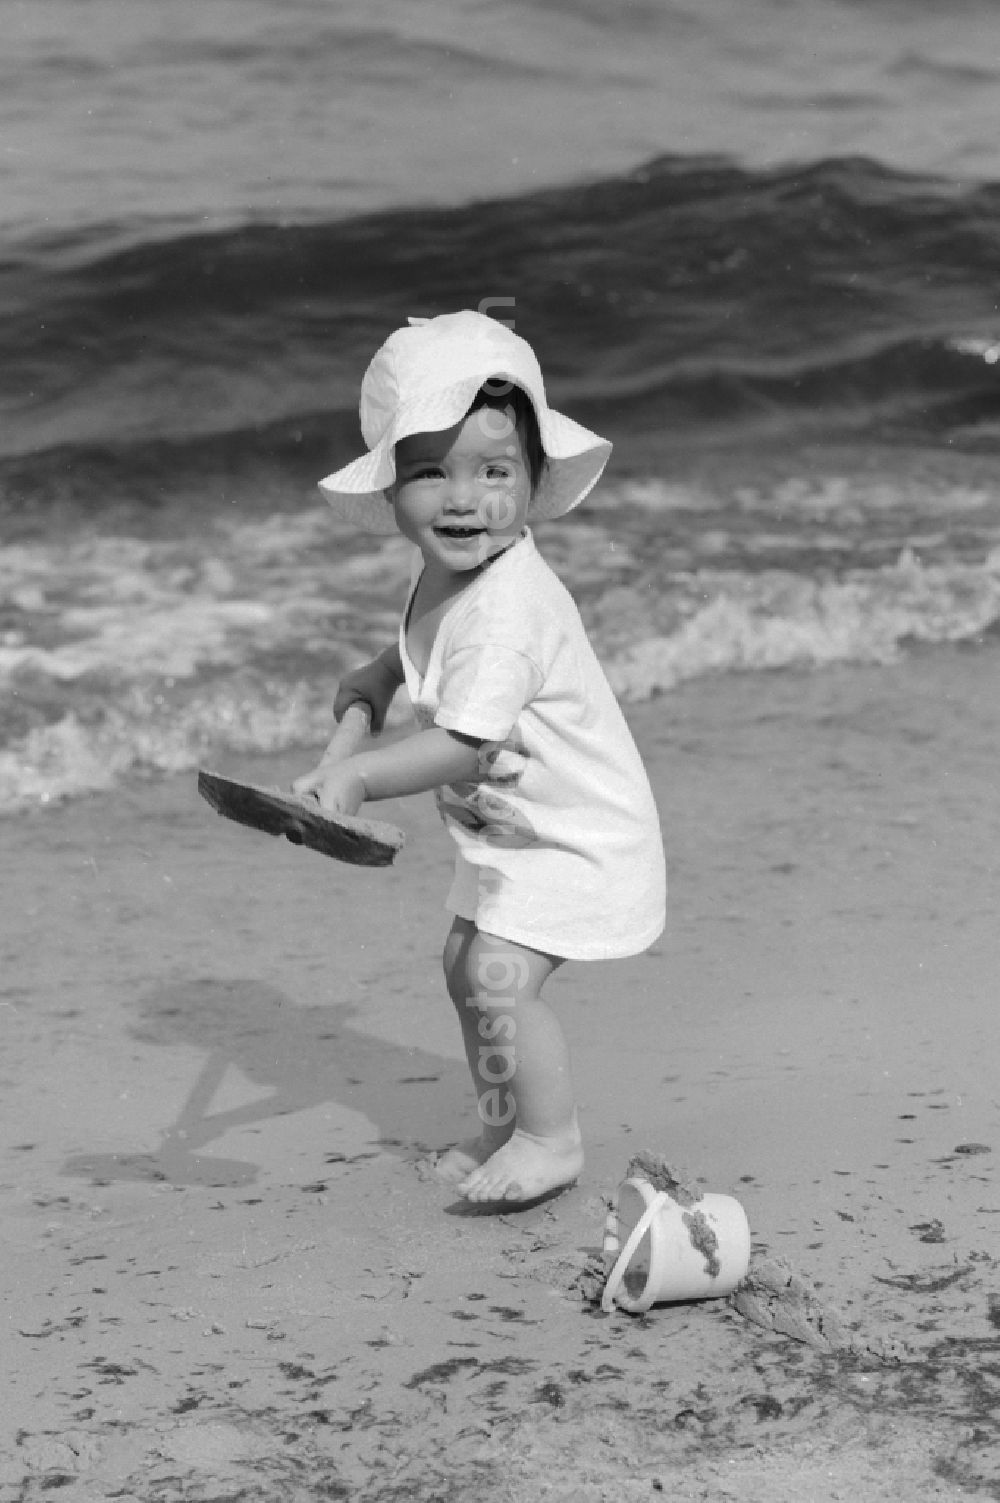 GDR photo archive: Ückeritz - Little child with shovel and pail on the beach in Ueckeritz in Mecklenburg-Western Pomerania in the field of the former GDR, German Democratic Republic